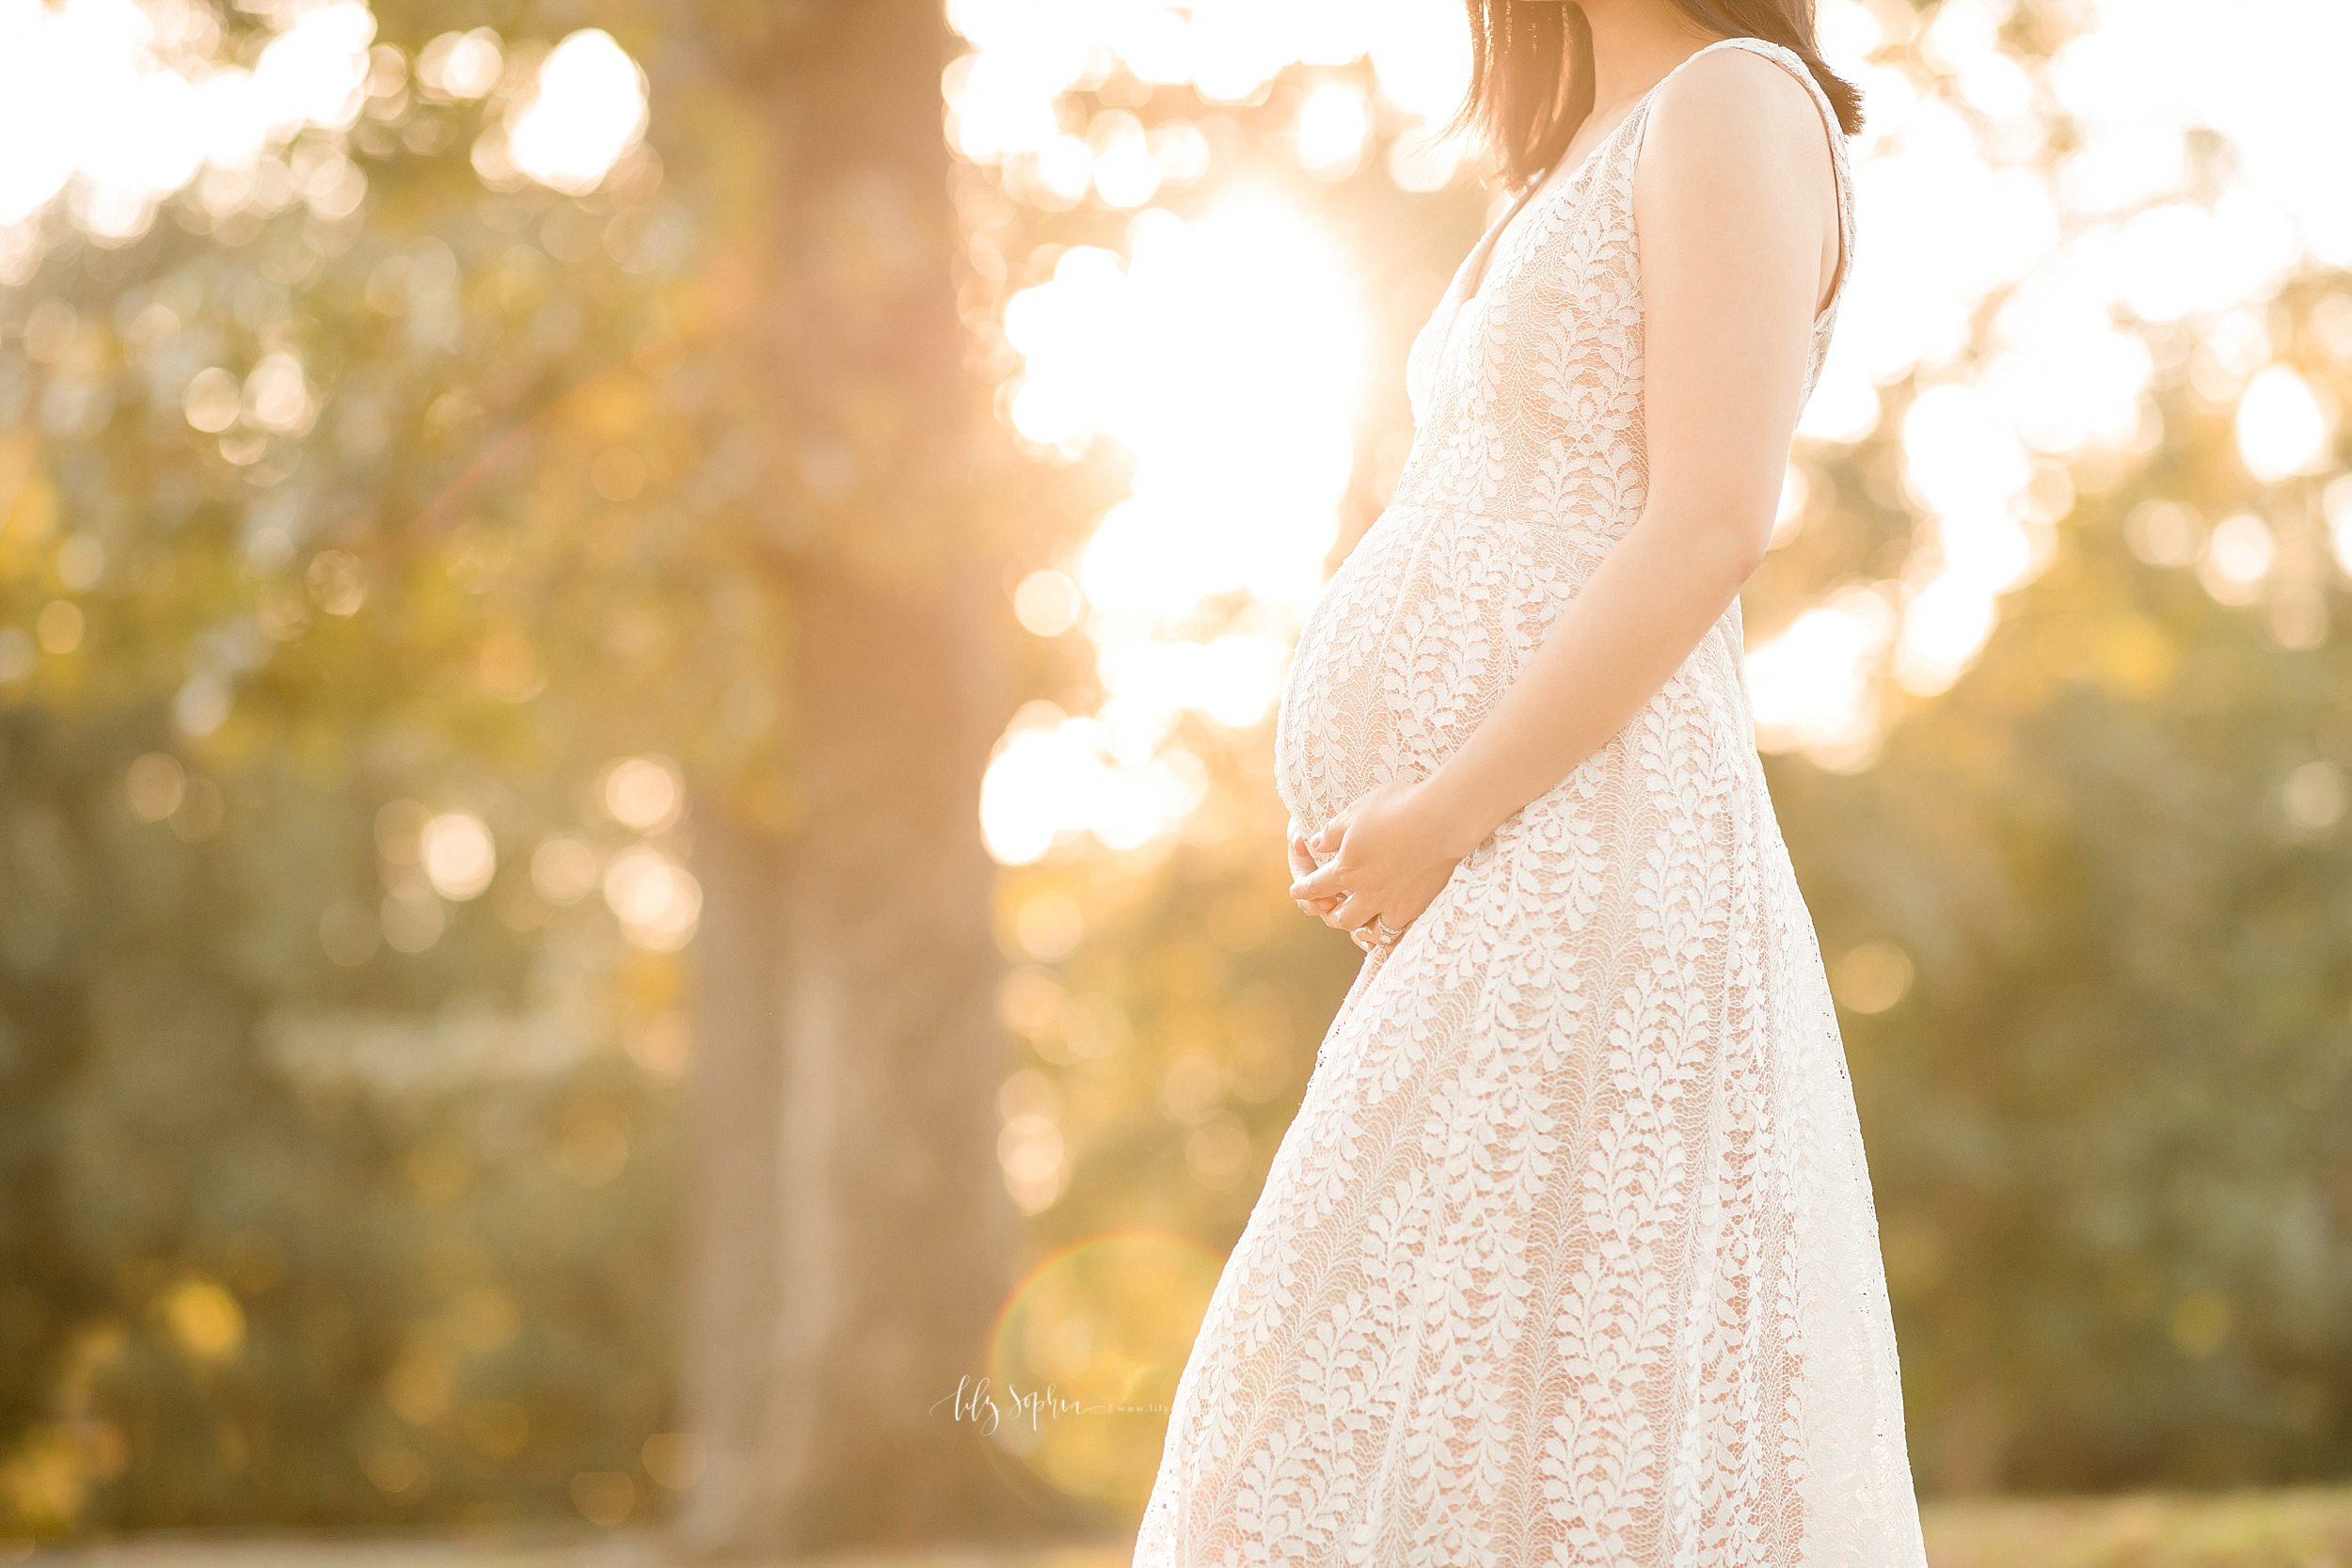 atlanta-buckhead-brookhaven-poncey-highlands-decatur-lily-sophia-photography-maternity-pregnancy-photographer-portraits-grant-park-intown-asian-couple-expecting-baby-girl_0728.jpg